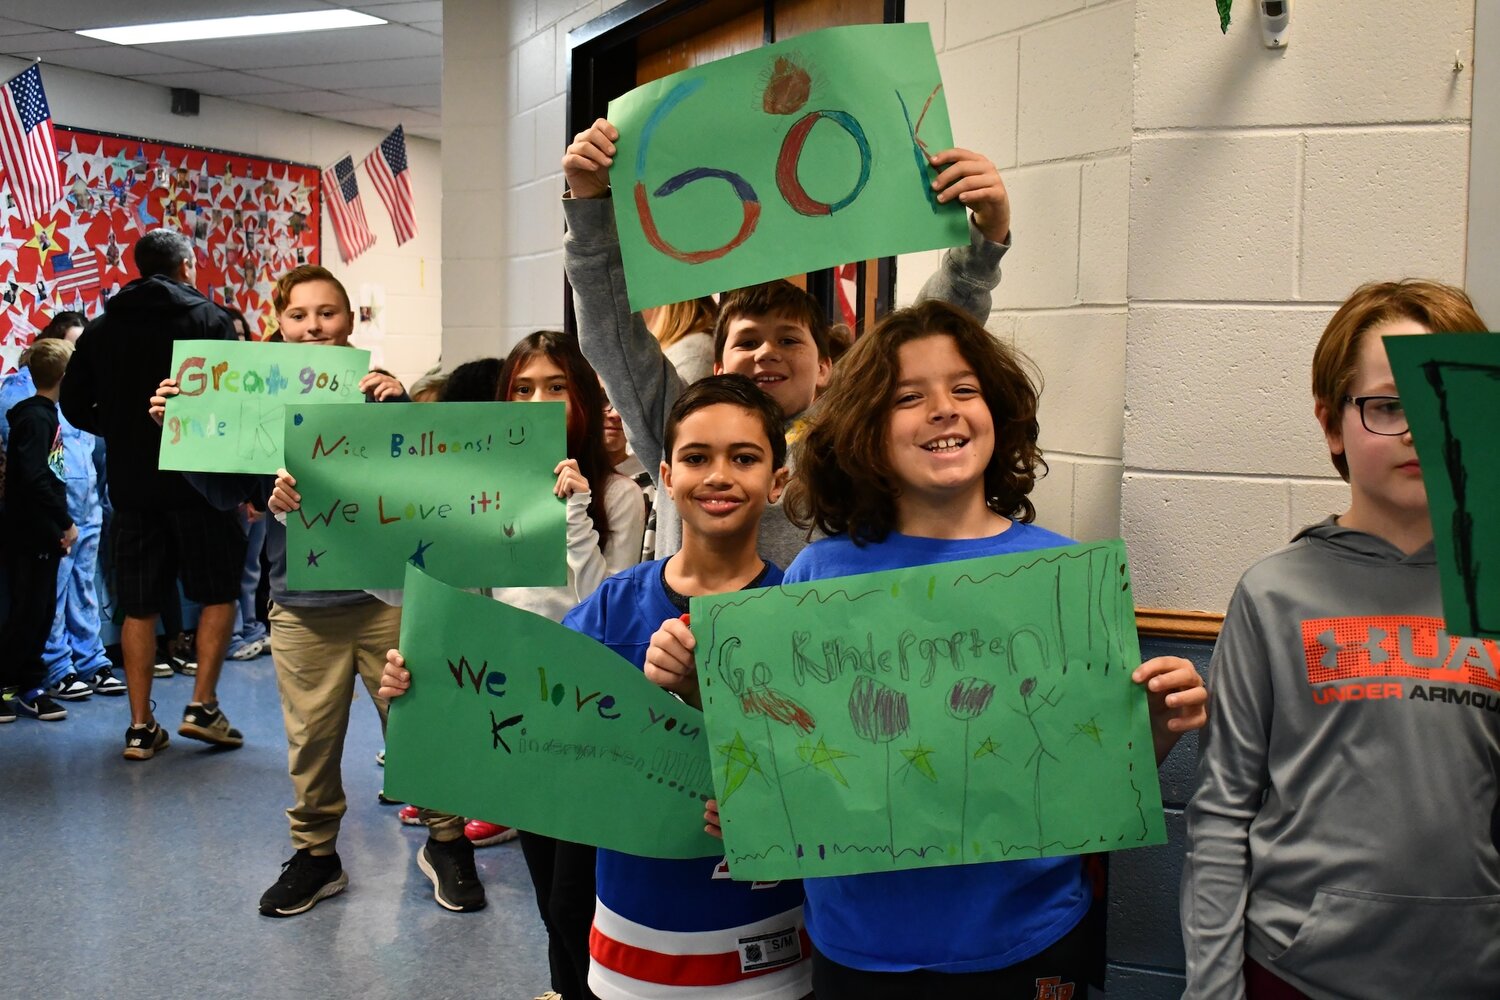 Older students beamed and cheered for the kindergarteners while holding handmade messages of support for their younger friends.